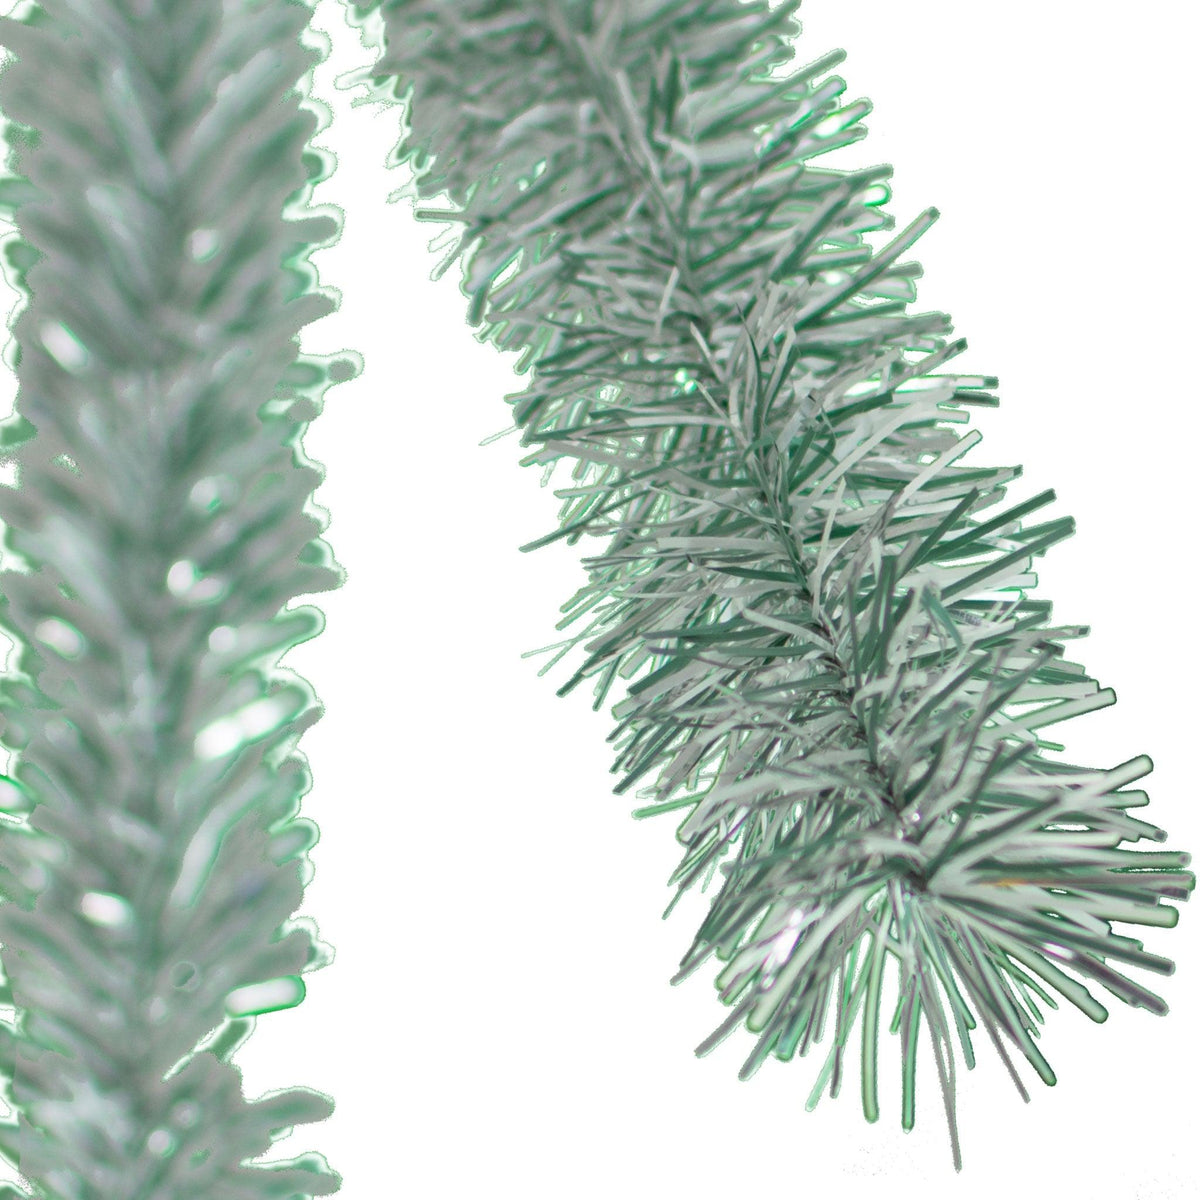 Lee Display's brand new 25ft Shiny White and Green Tinsel Garlands and Fringe Embellishments on sale at leedisplay.com